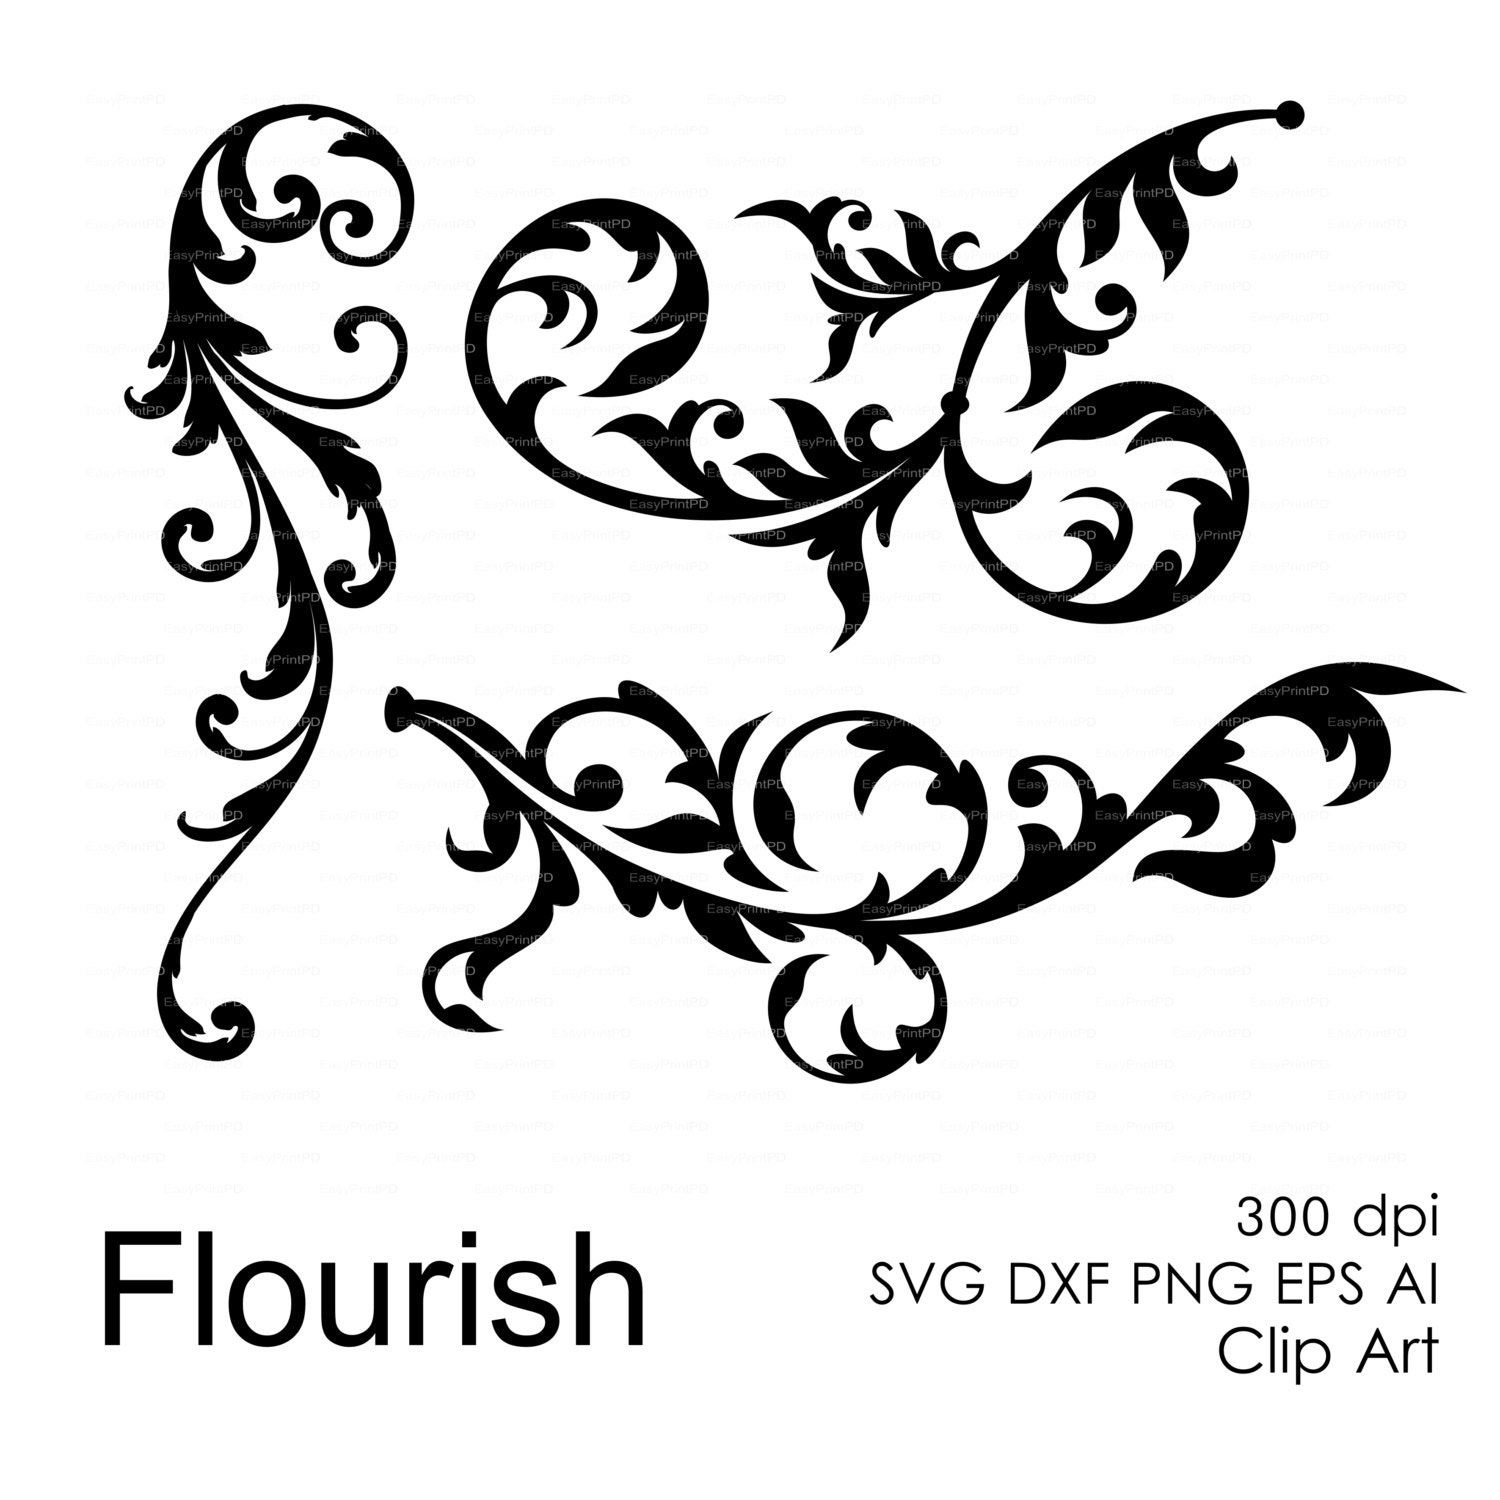 Download Flourish svg dxf eps ai png Overlays template